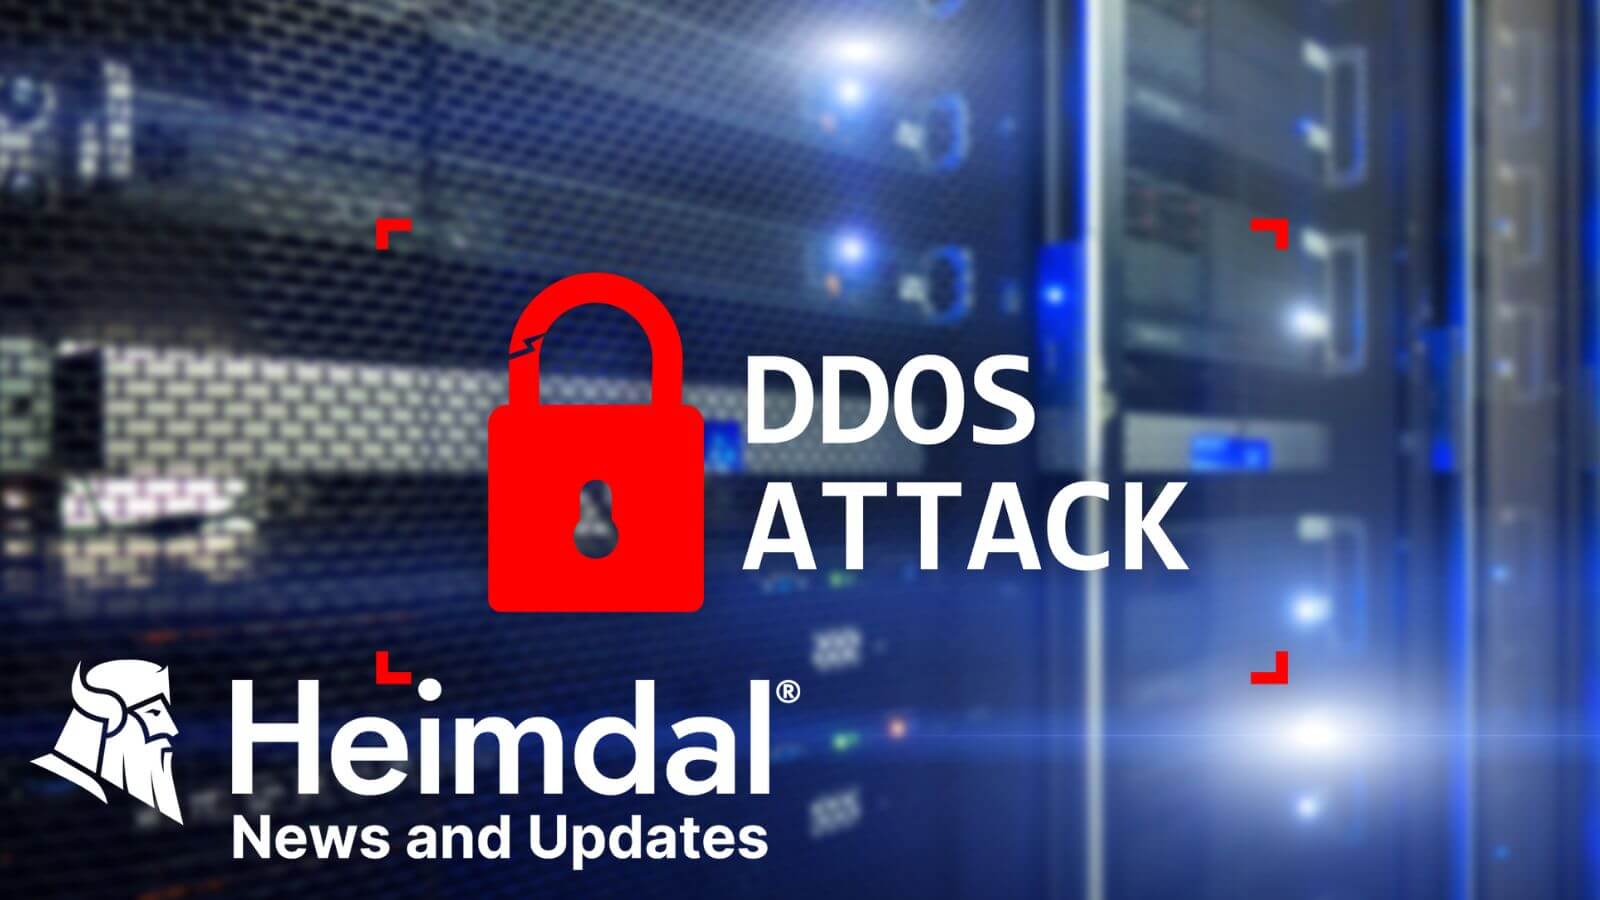 Critical Zyxel Firewall Vulnerability Exploited in DDOS Attacks – Source: heimdalsecurity.com